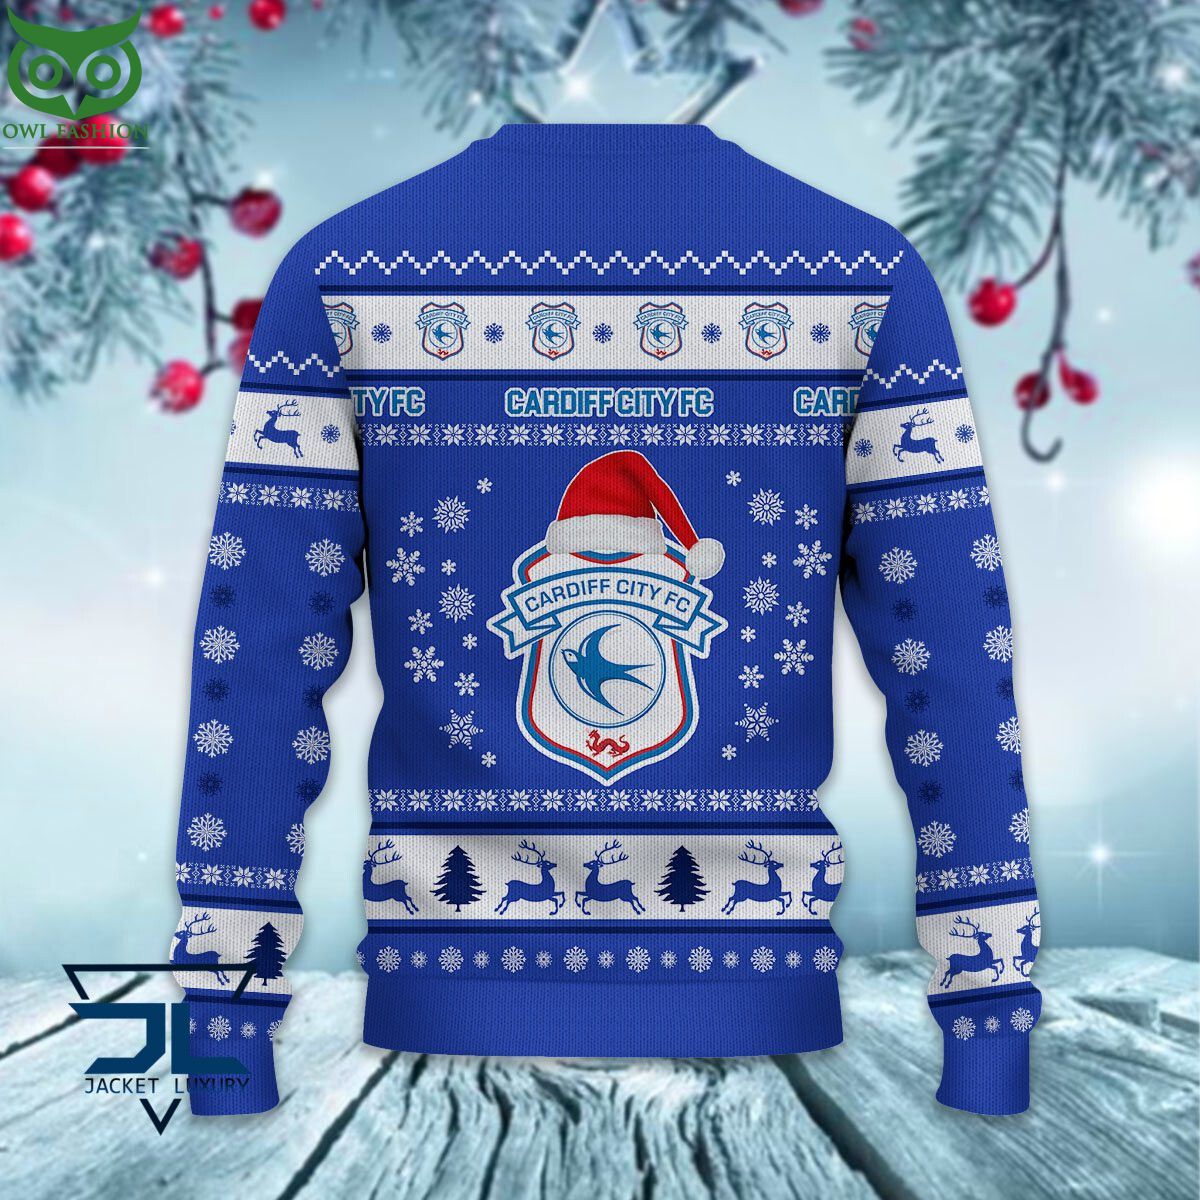 Cardiff City F.C EPL League Cup Ugly Sweater Nice shot bro